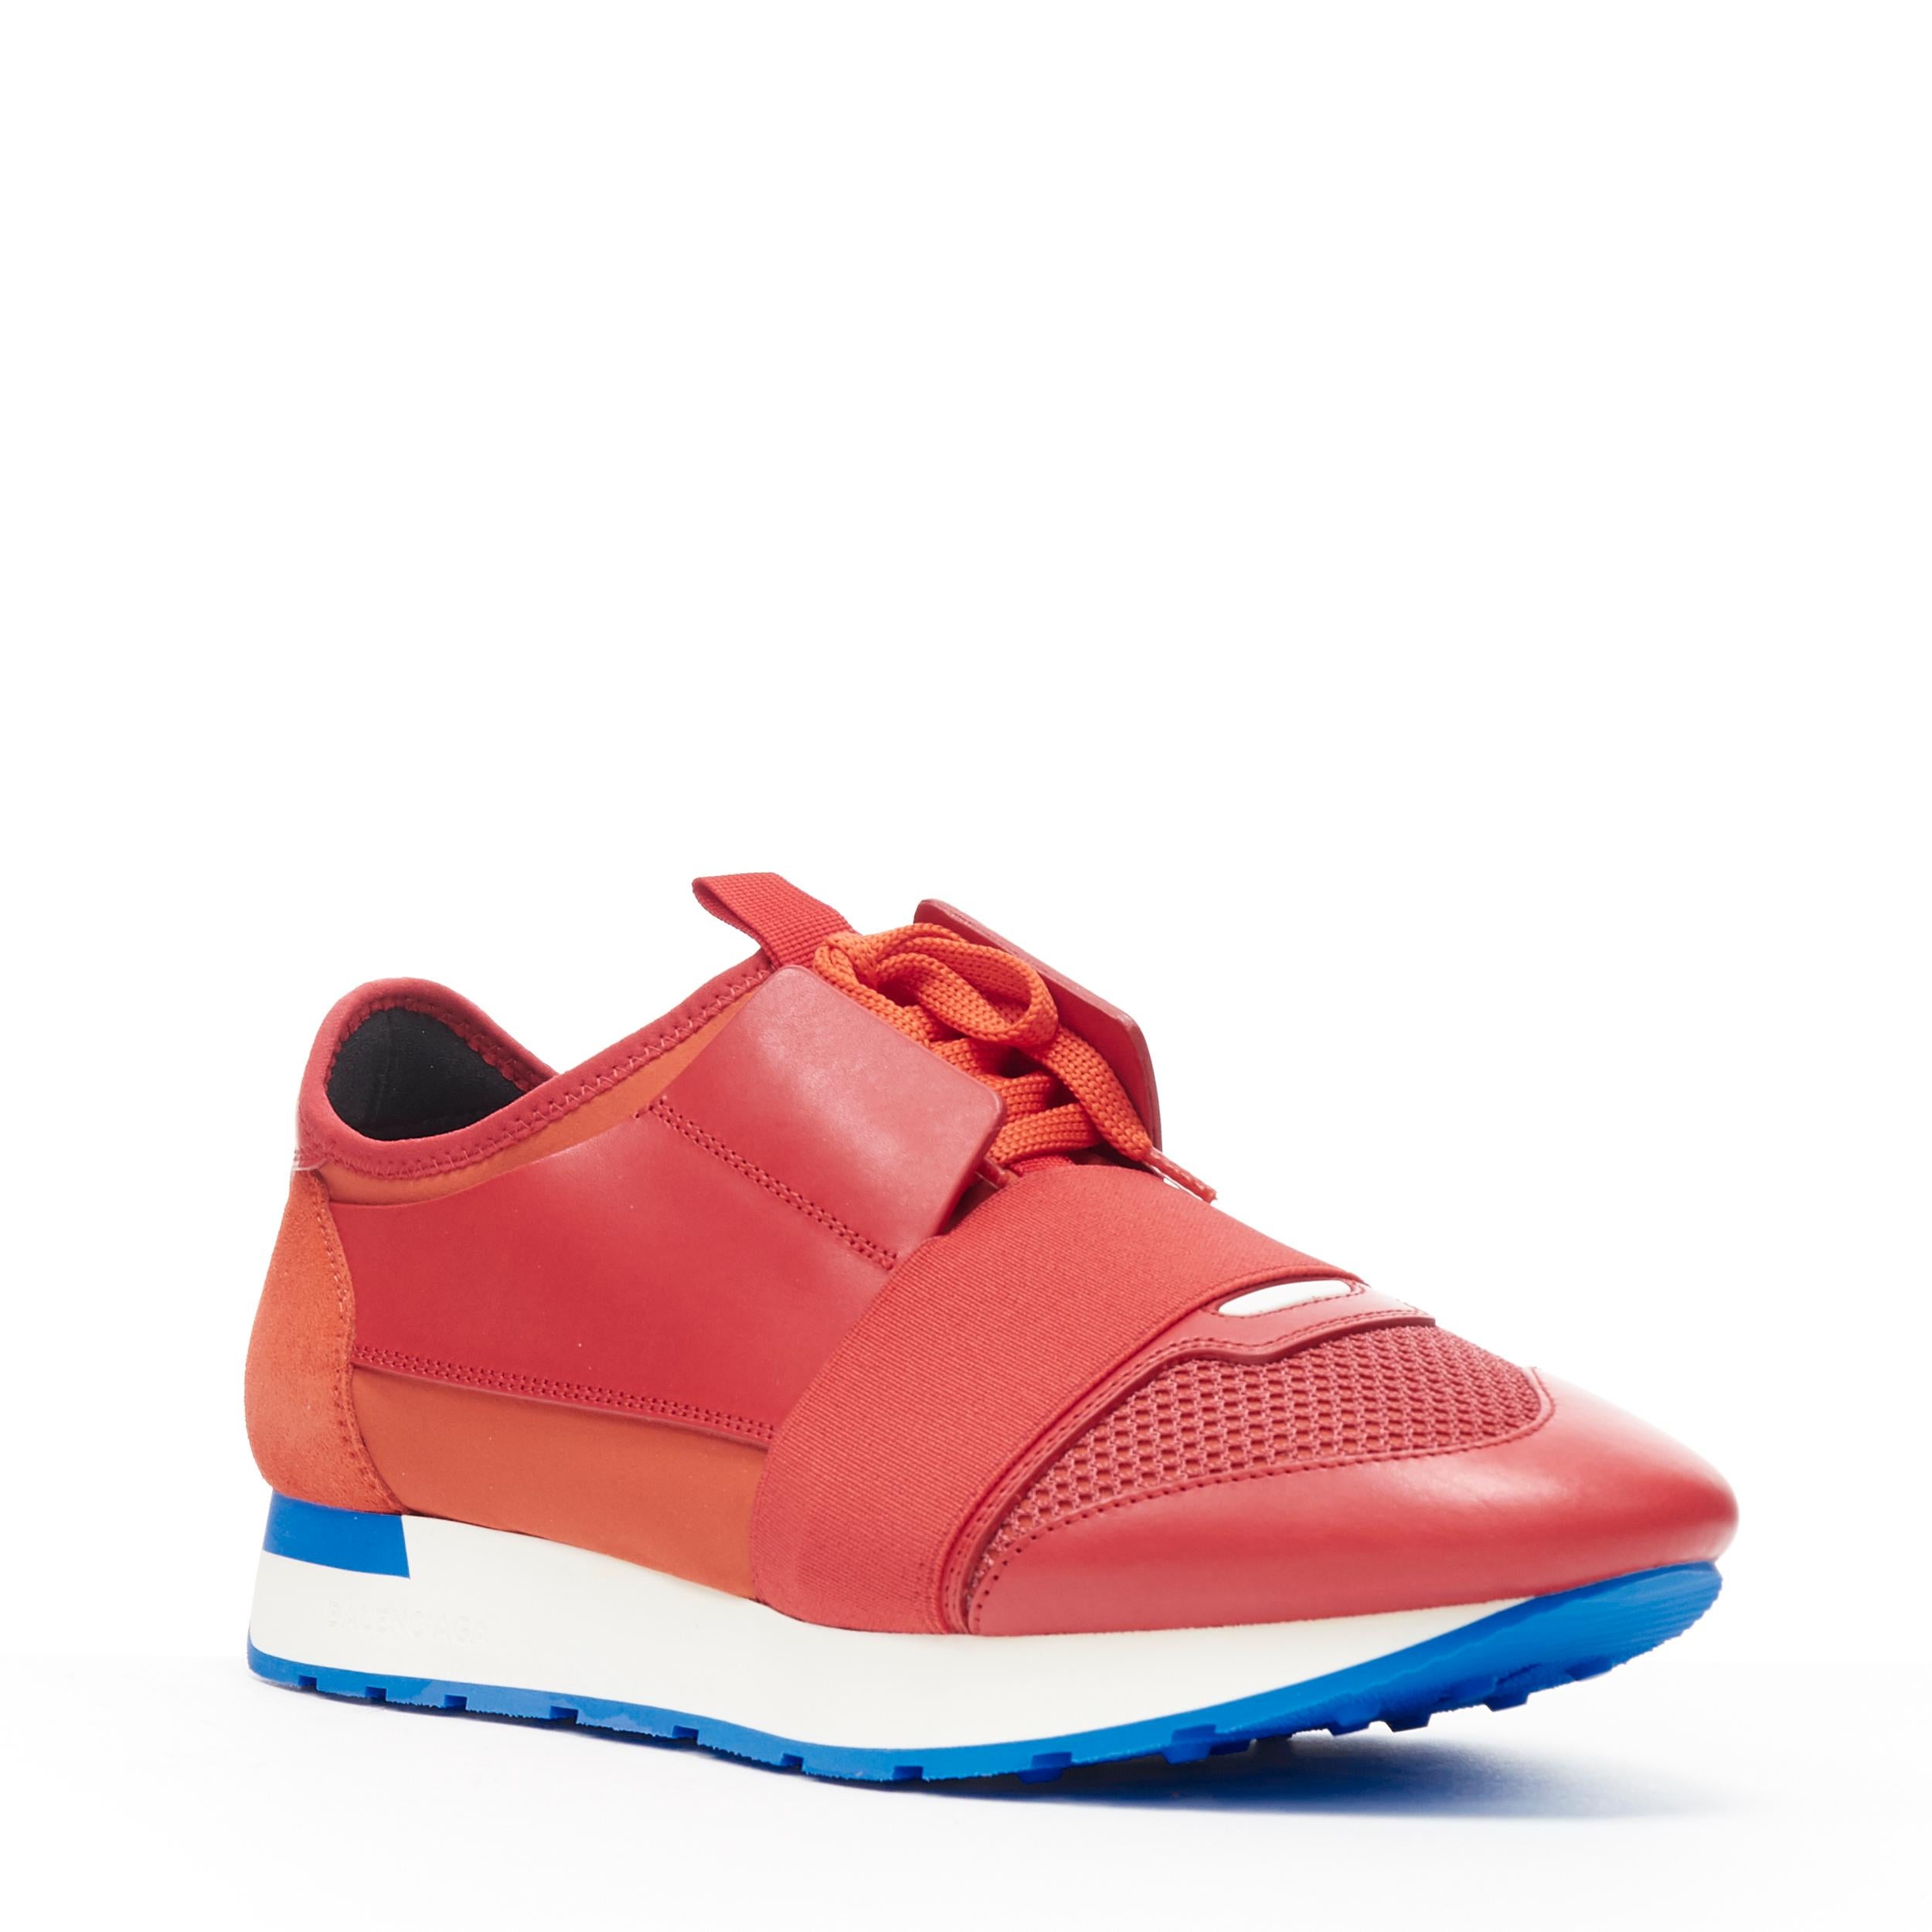 new BALENCIAGA Race Runner red white low sneakers EU41 US8 506328 W0YXS 6501
Brand: Balenciaga
Model Name / Style: Balenciaga Race Runner
Material: Leather
Color: Red
Pattern: Solid
Closure: Lace up
Extra Detail: Every season, Balenciaga updates its